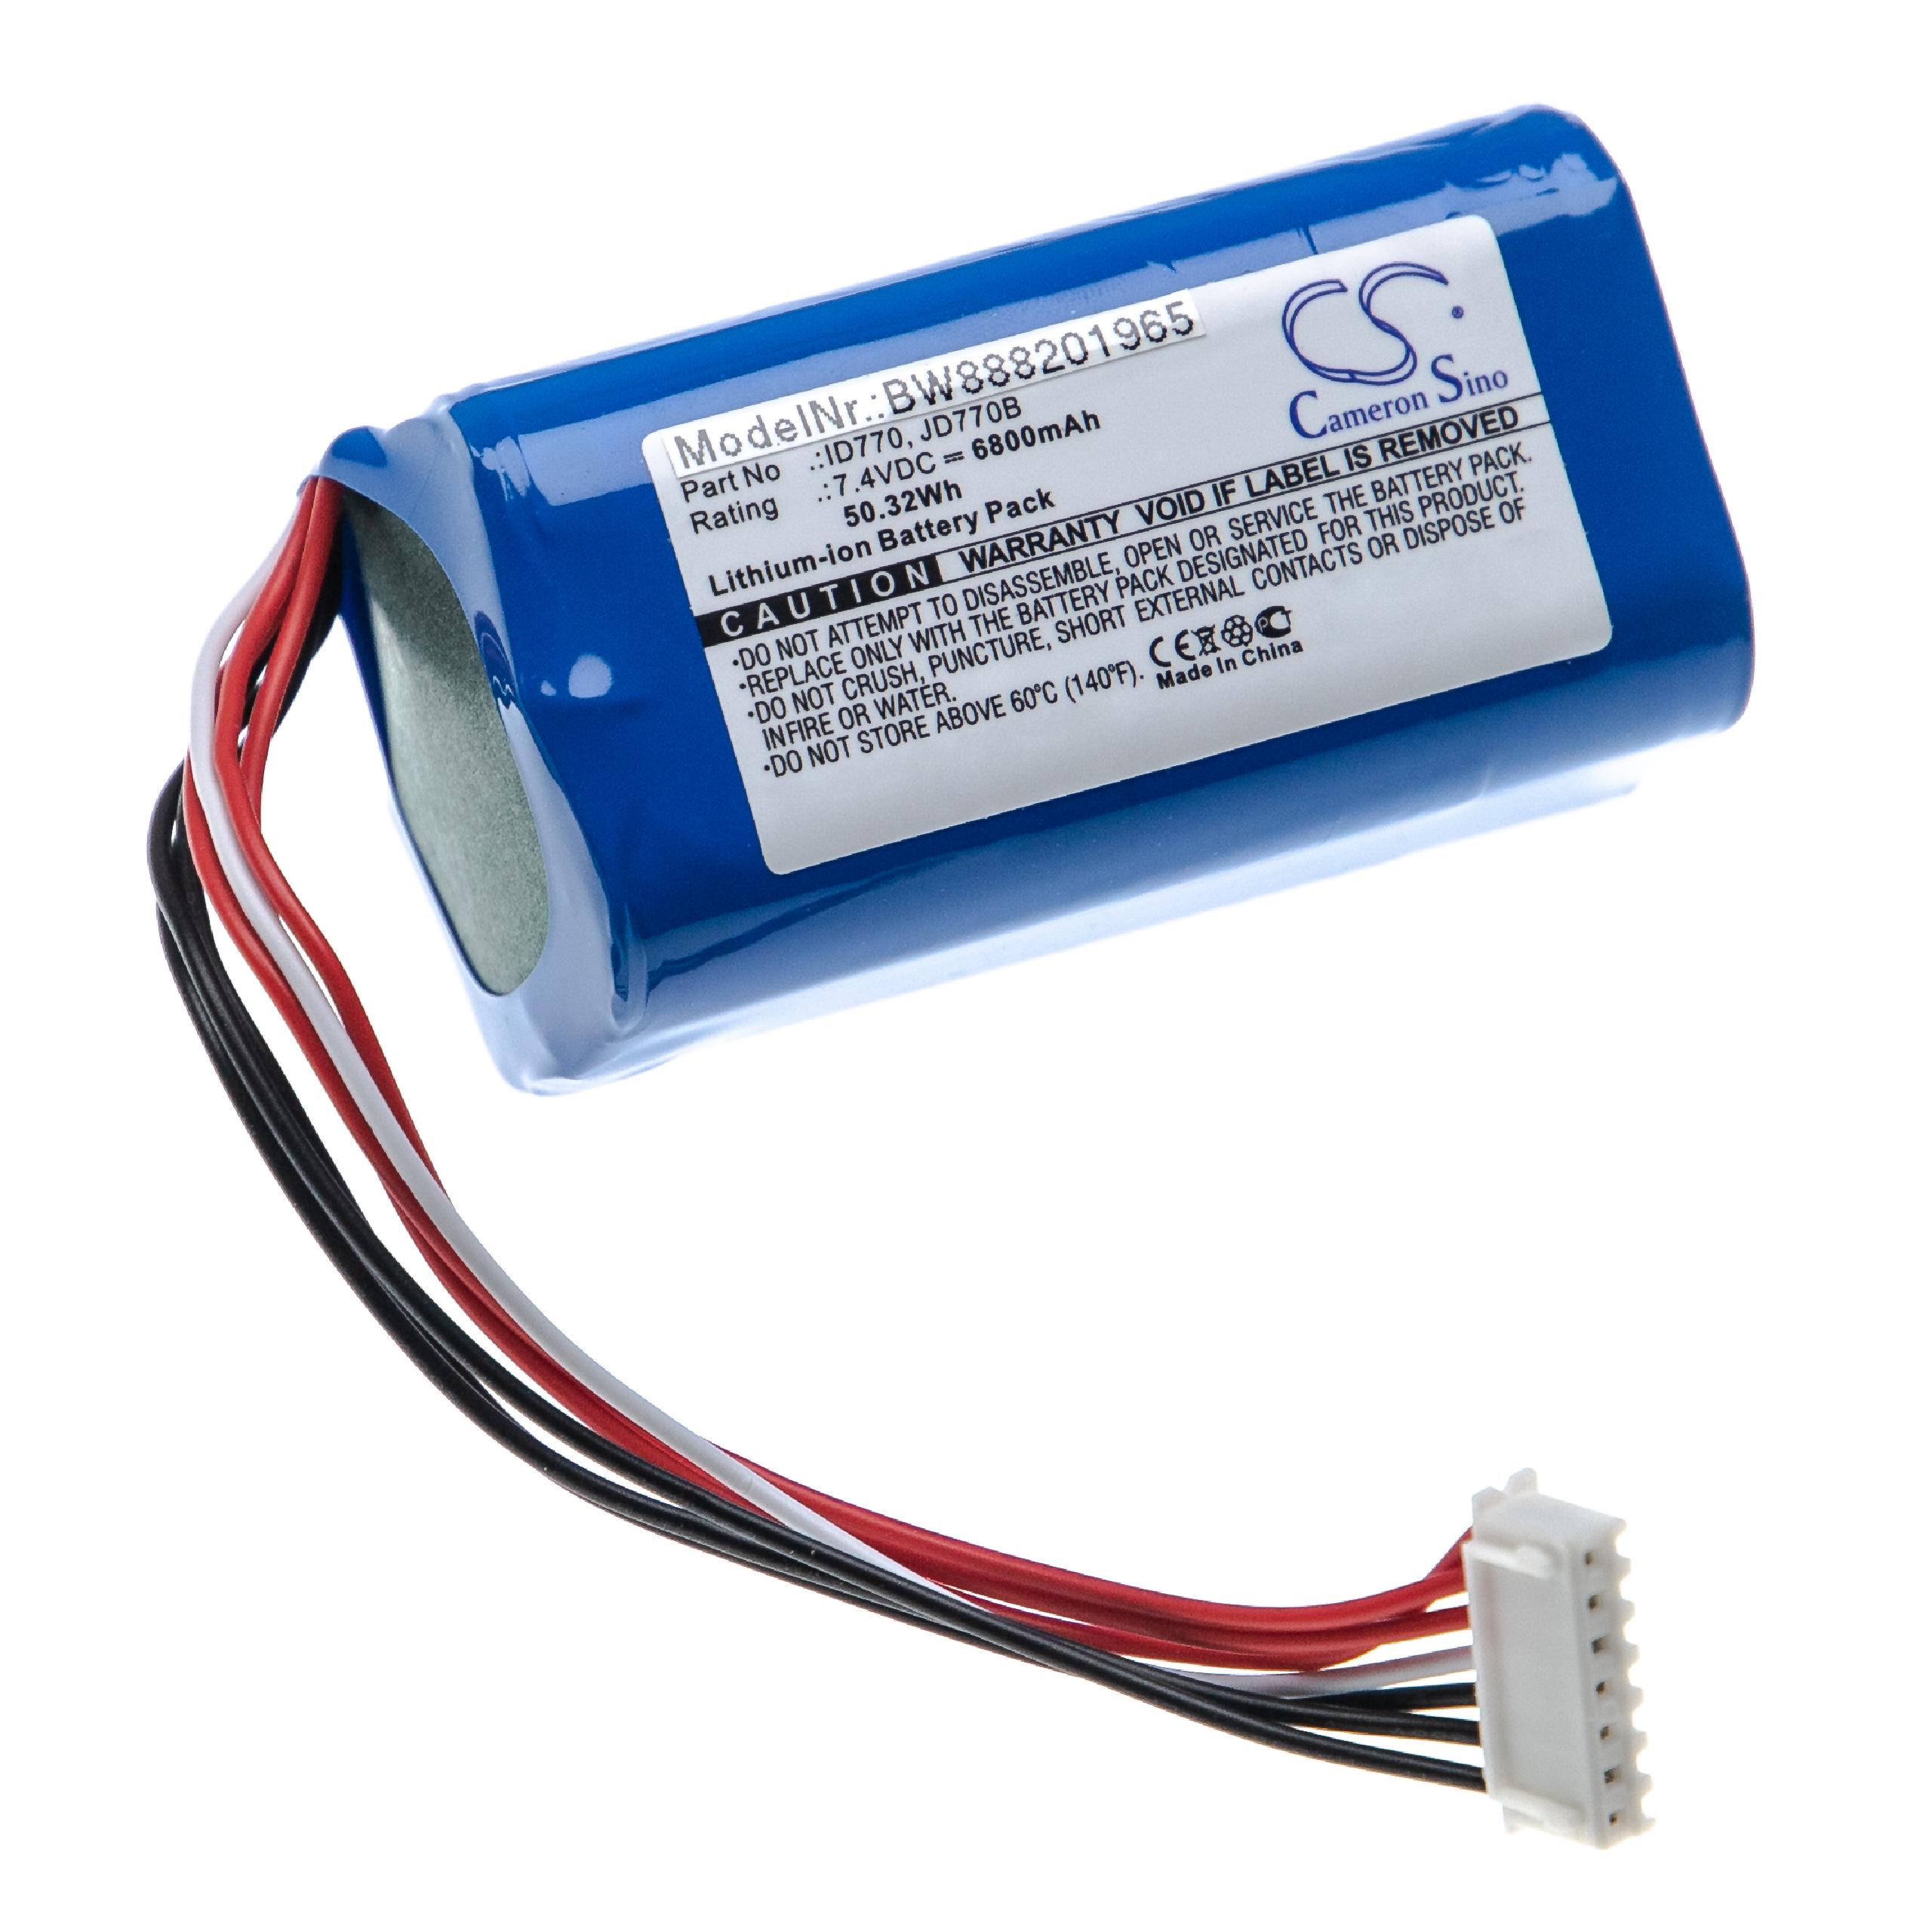  Battery replaces Sony ID770, JD770B for SonyLoudspeaker - Li-Ion 6800 mAh 4 cells